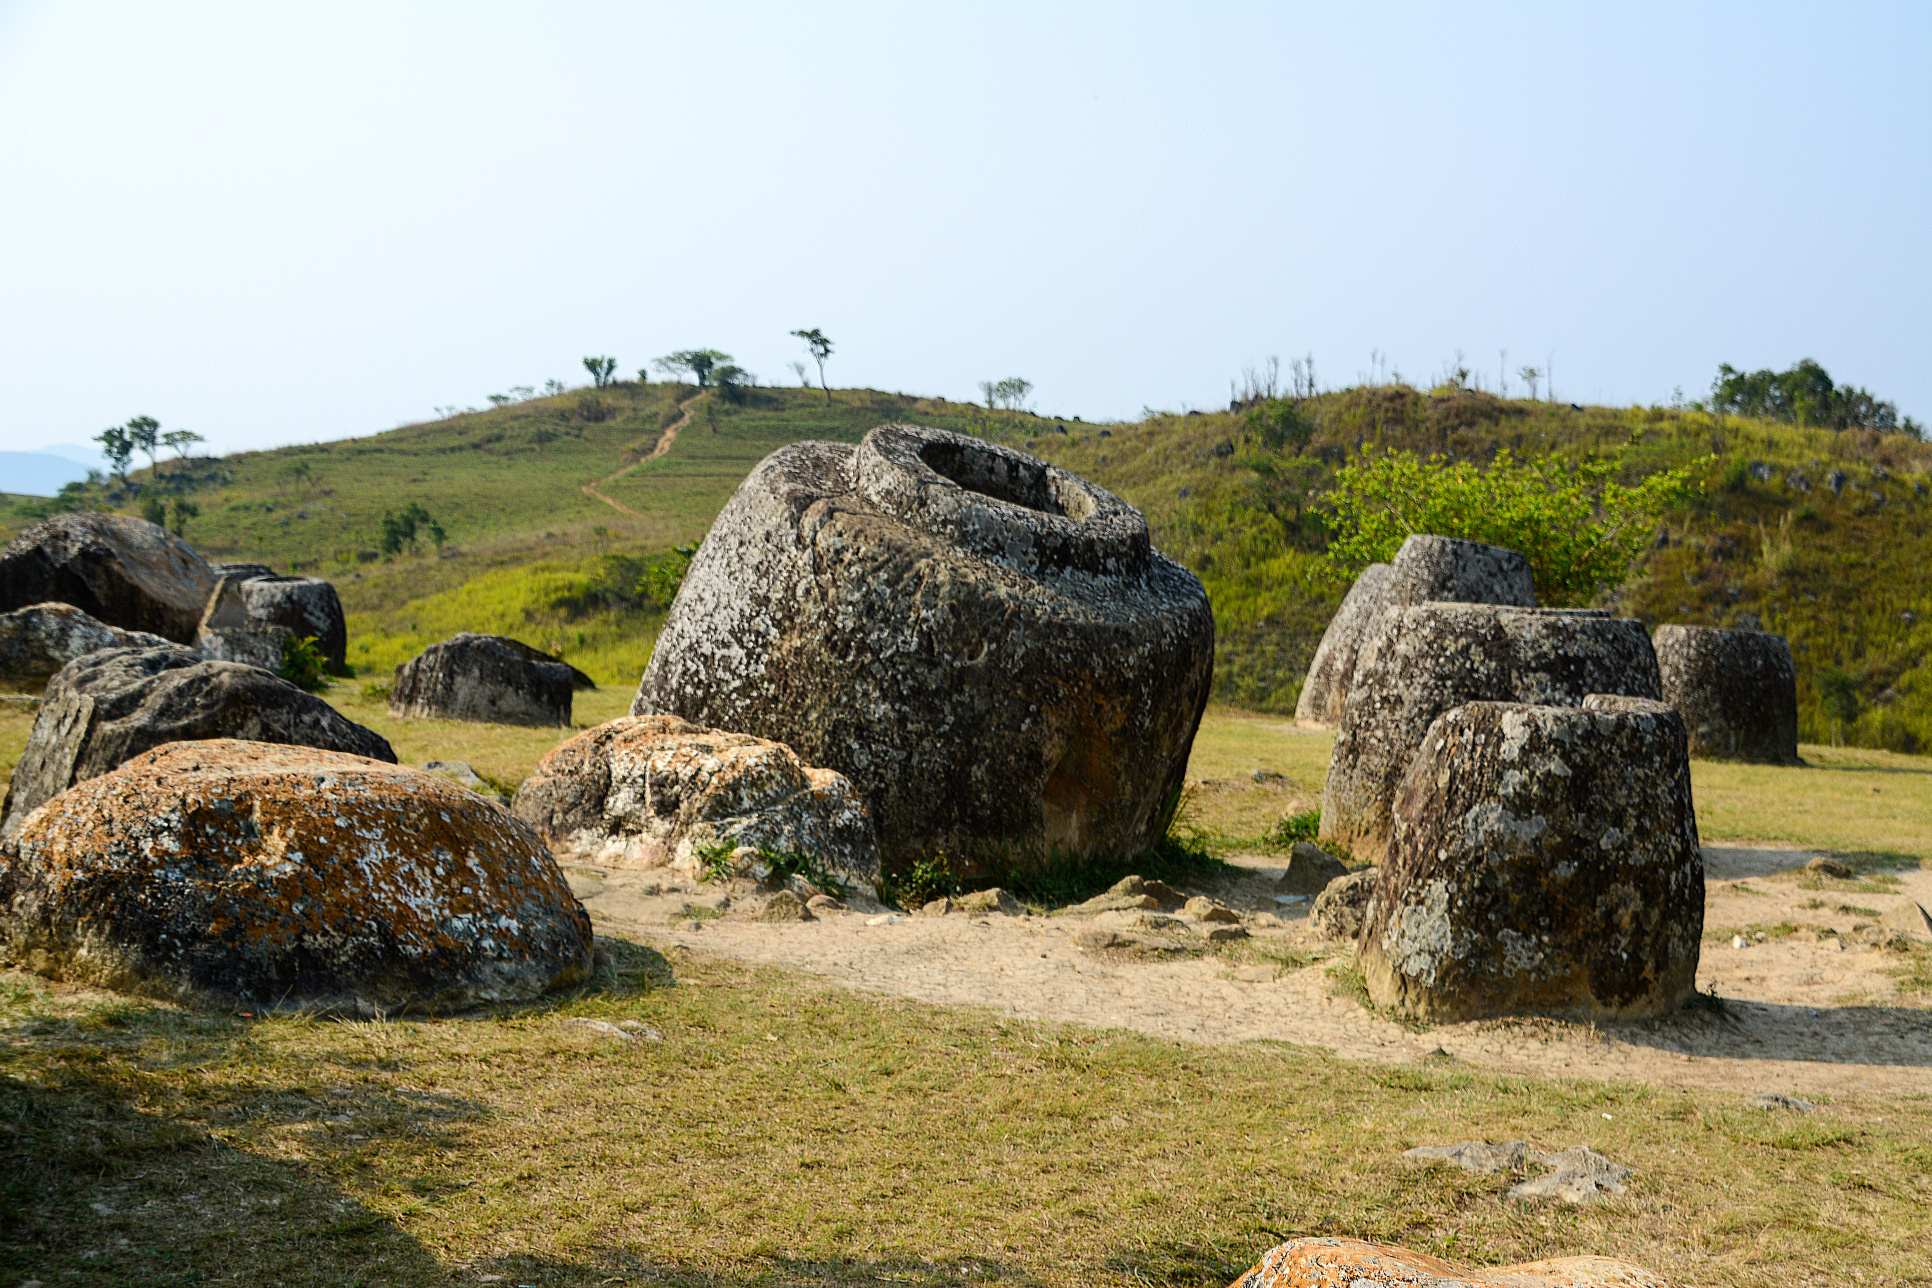 The Plain of jars is an archeological site in Laos comprising thousands of huge stone jars